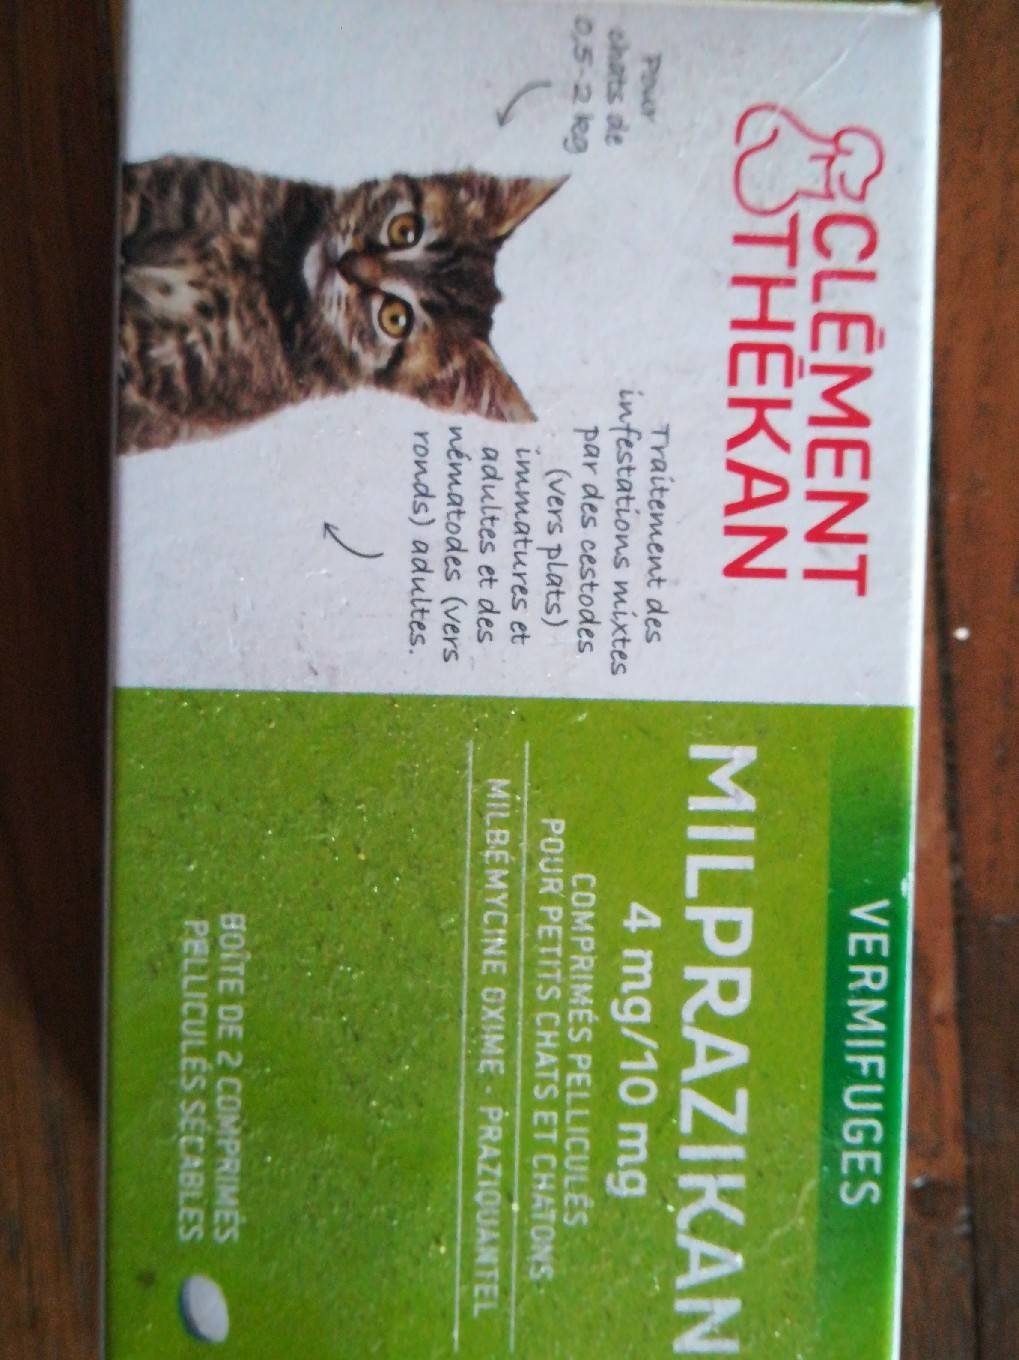 Milprazikan Chatons 2CPR - Nutrition facts - fr